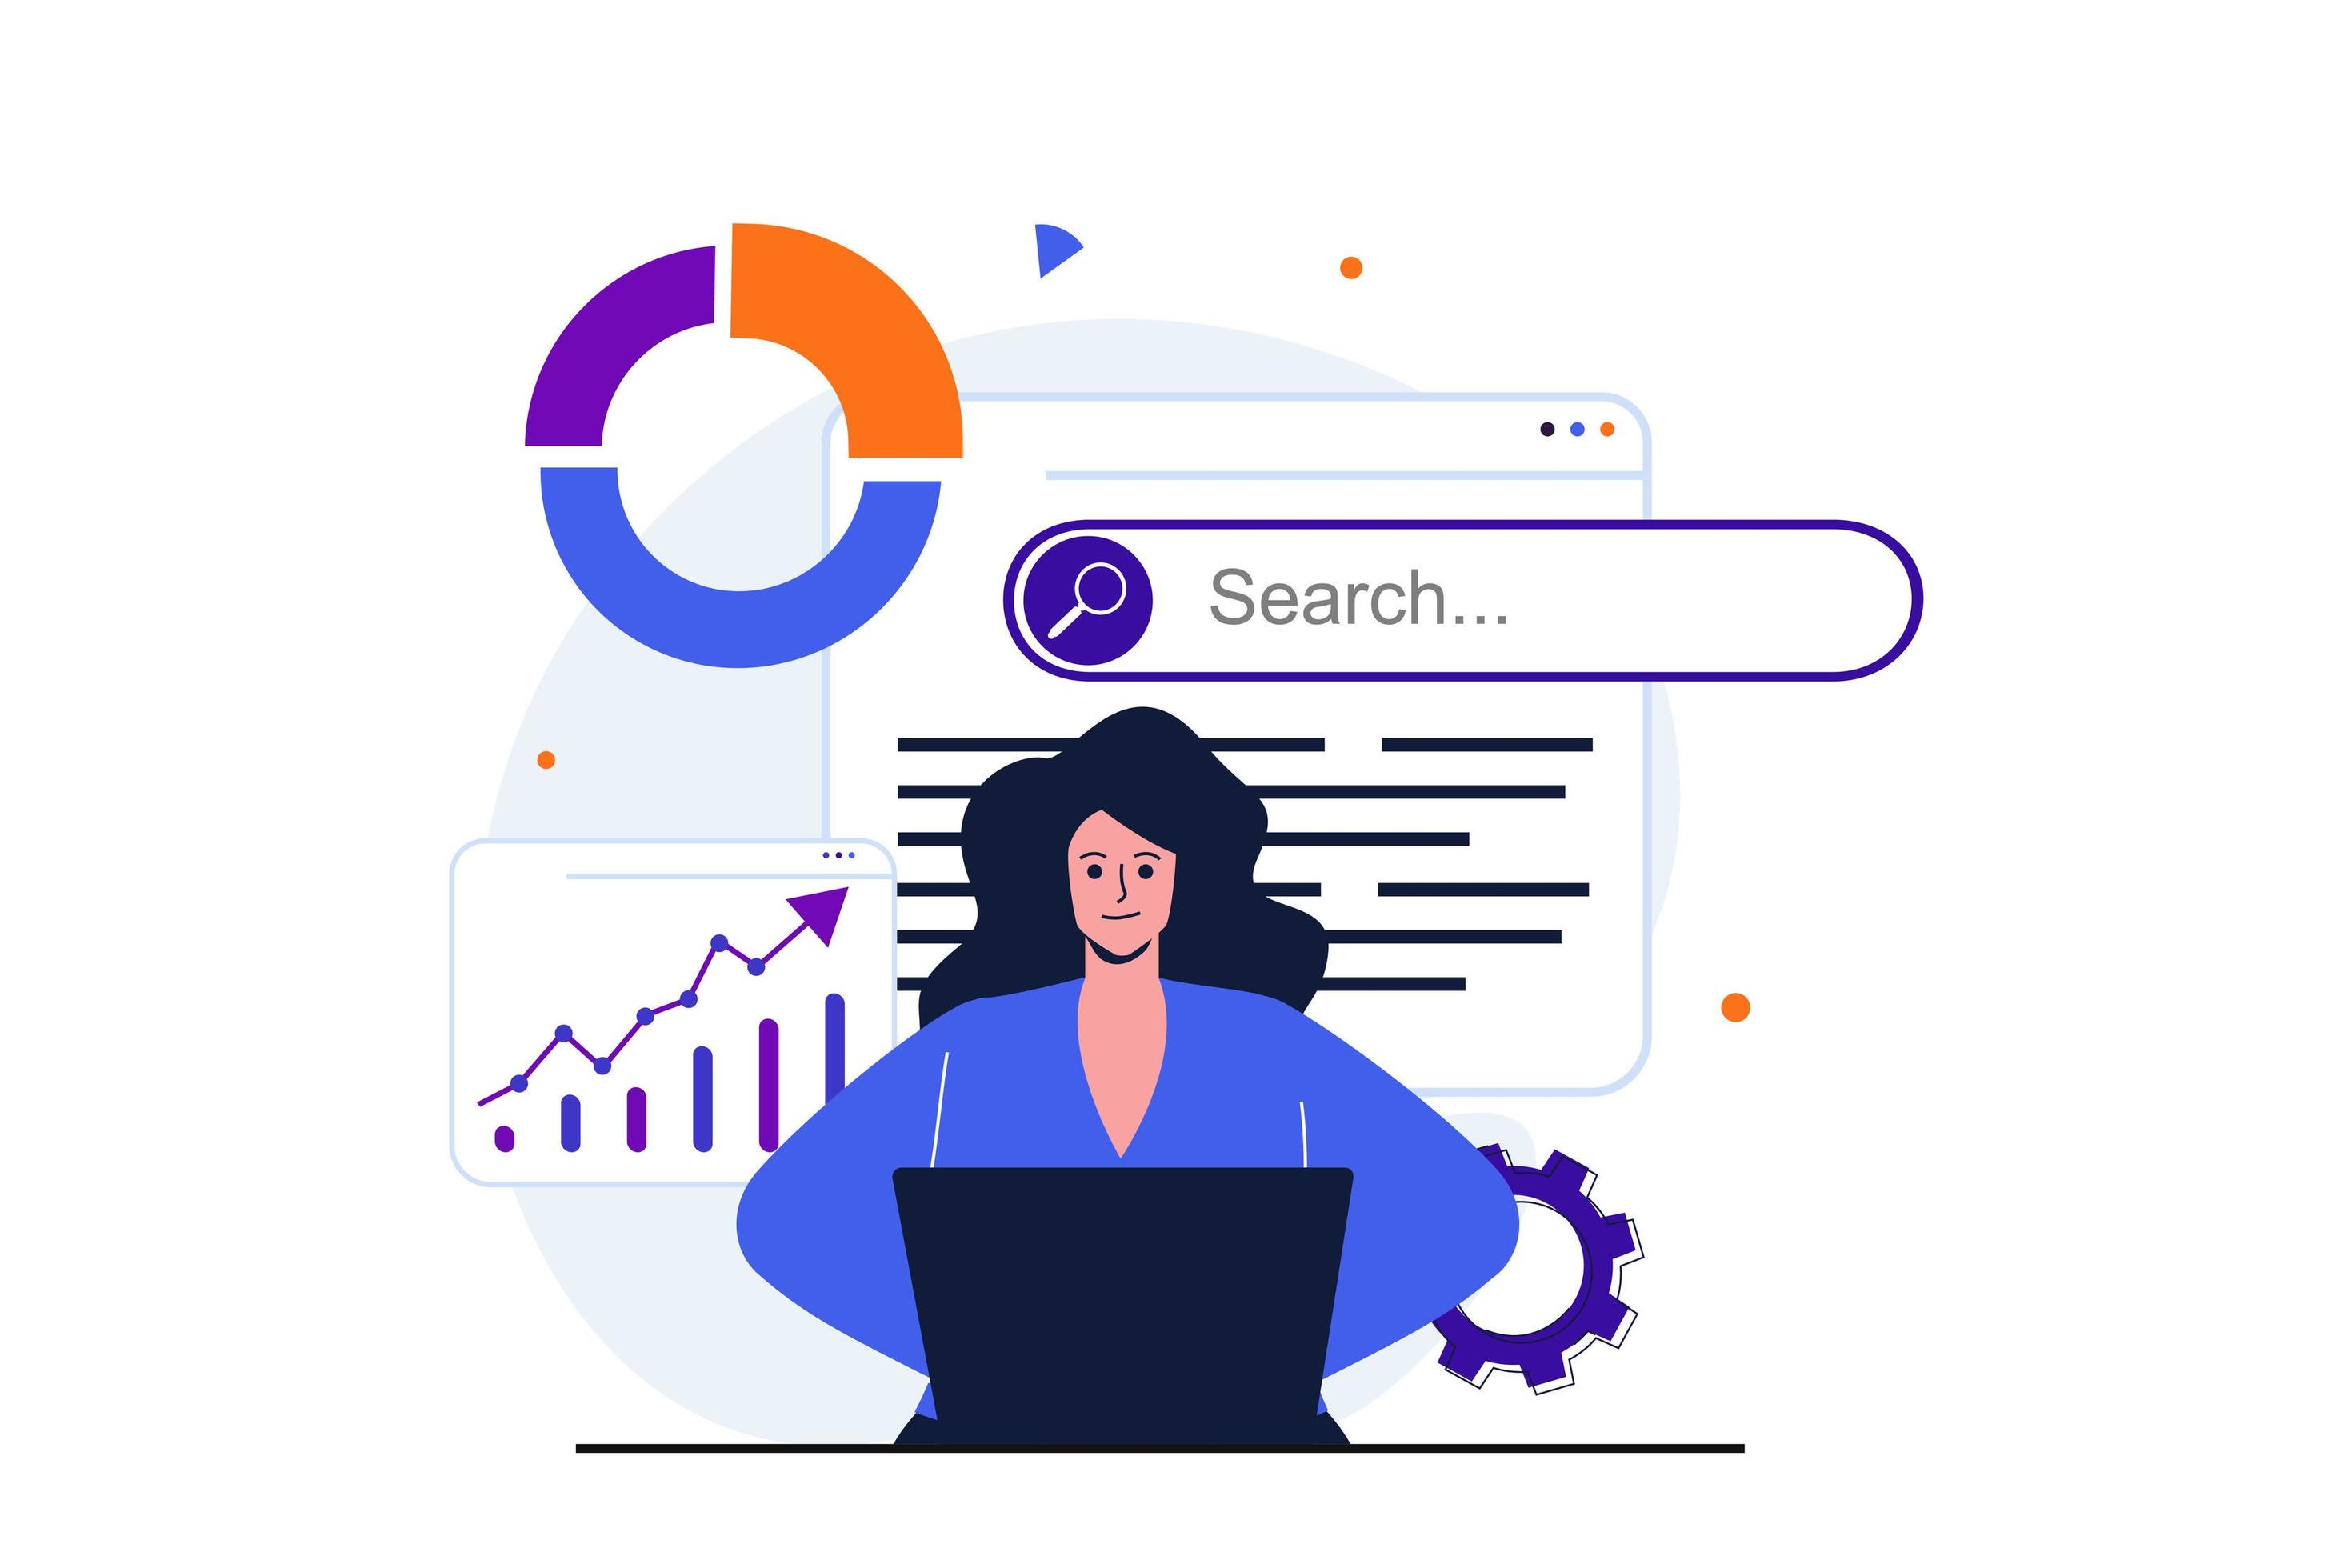 seo-analysis-modern-flat-concept-for-web-banner-design-woman-analyst-studies-data-selects-keywords-and-optimizes-site-for-popular-search-queries-illustration-with-isolated-people-scene-vector.jpg